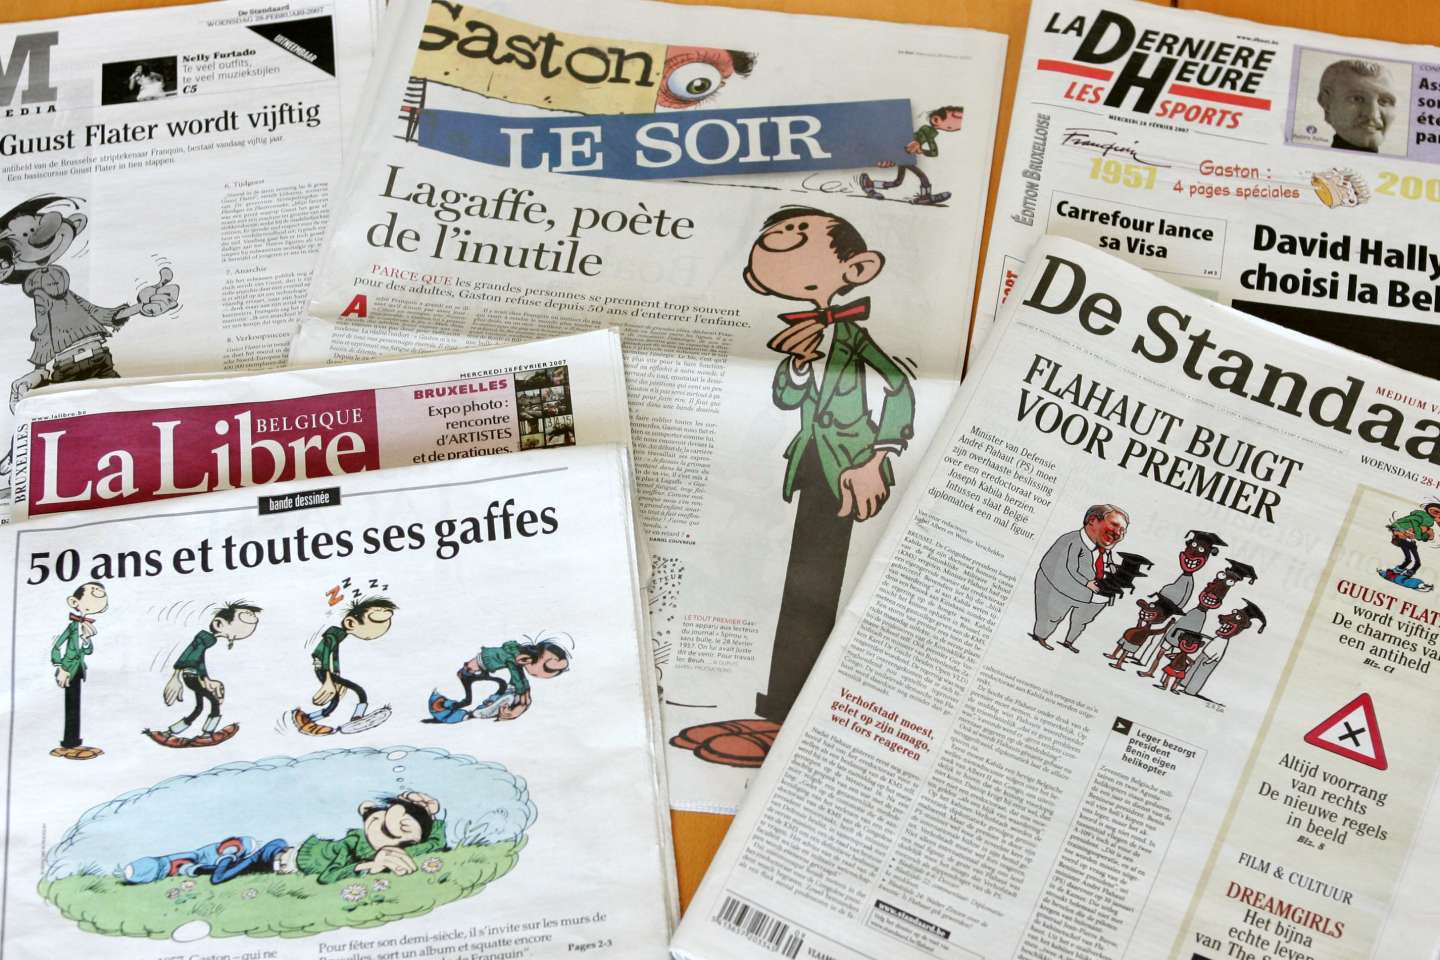 Dupuis editions hope to release a new Gaston Lagaffe “before the end of the year”